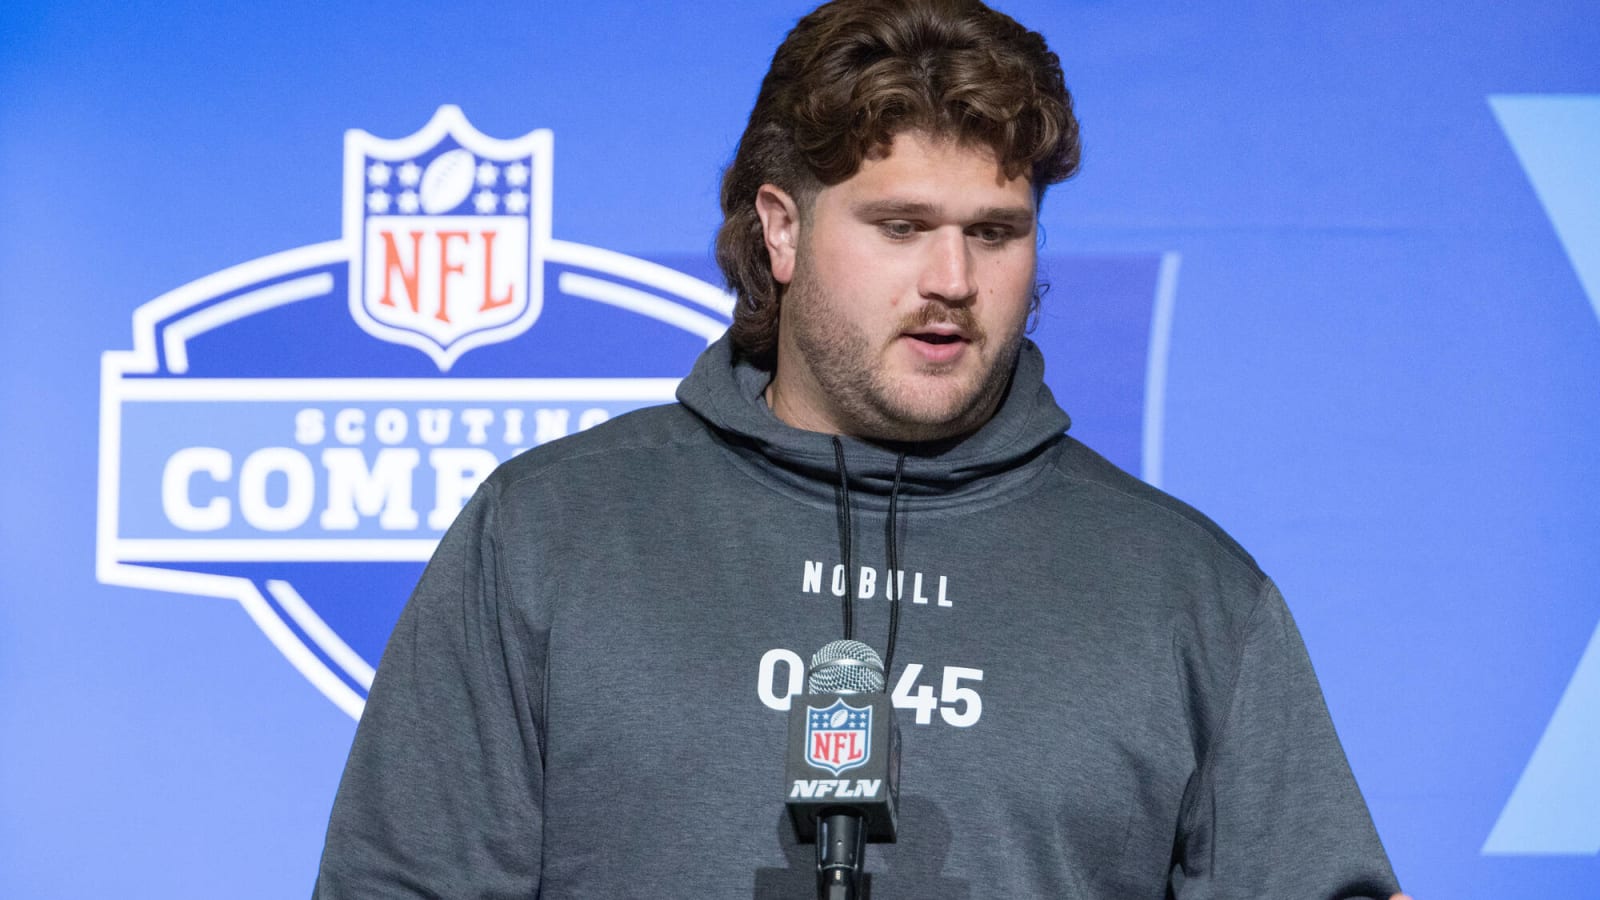 Giants could target athletic interior lineman in 1st round